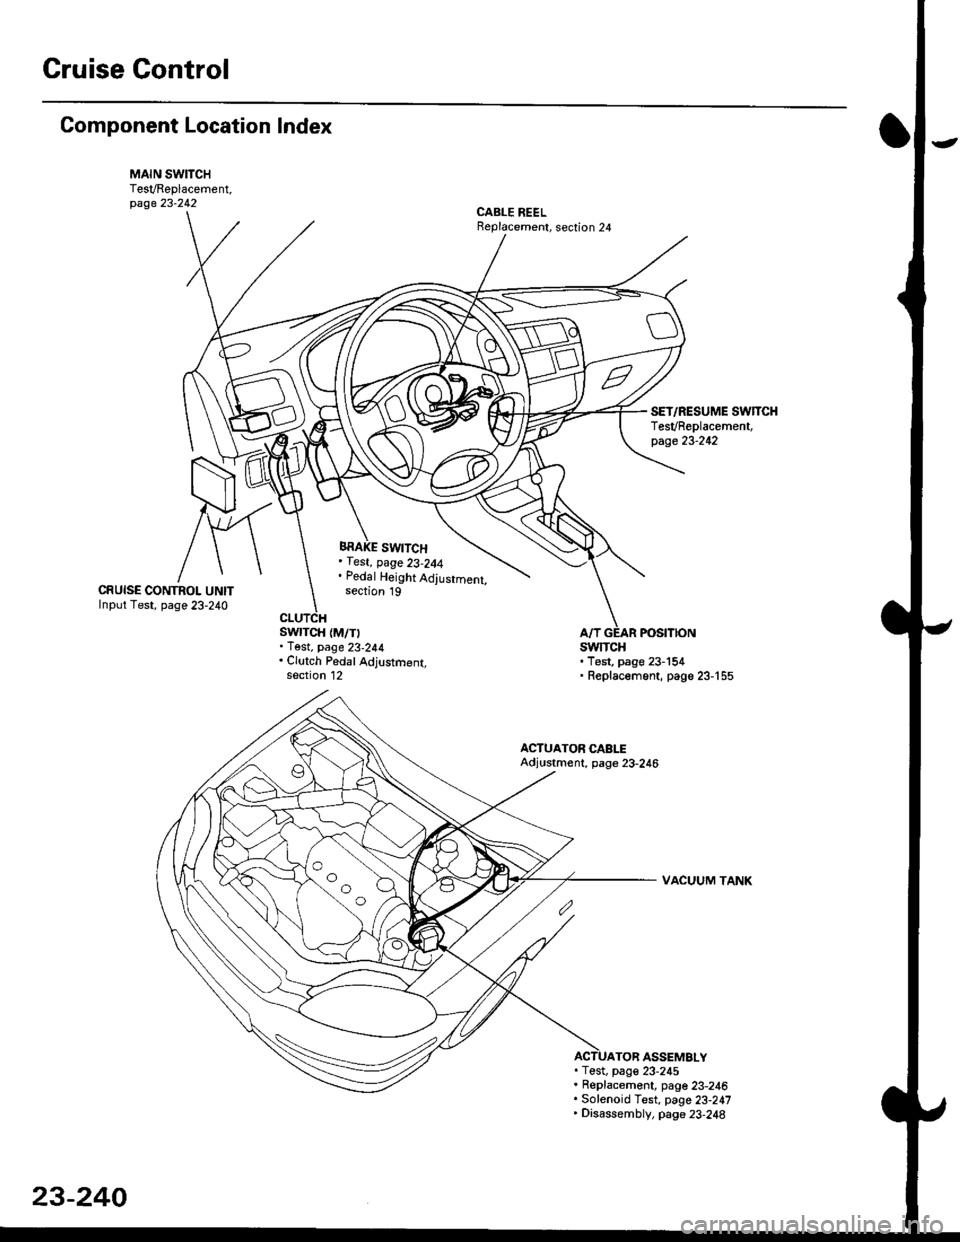 HONDA CIVIC 1997 6.G Workshop Manual Gruise Control
Component Location Index
MAIN SWITCHTesVReplacement,page 23-242CABLE REELReplacement, section 24
BRAKE SWITCH, fest, page 23-244. Pedal Height Adjustment,section 19CRUISE CONTROI. UNITI